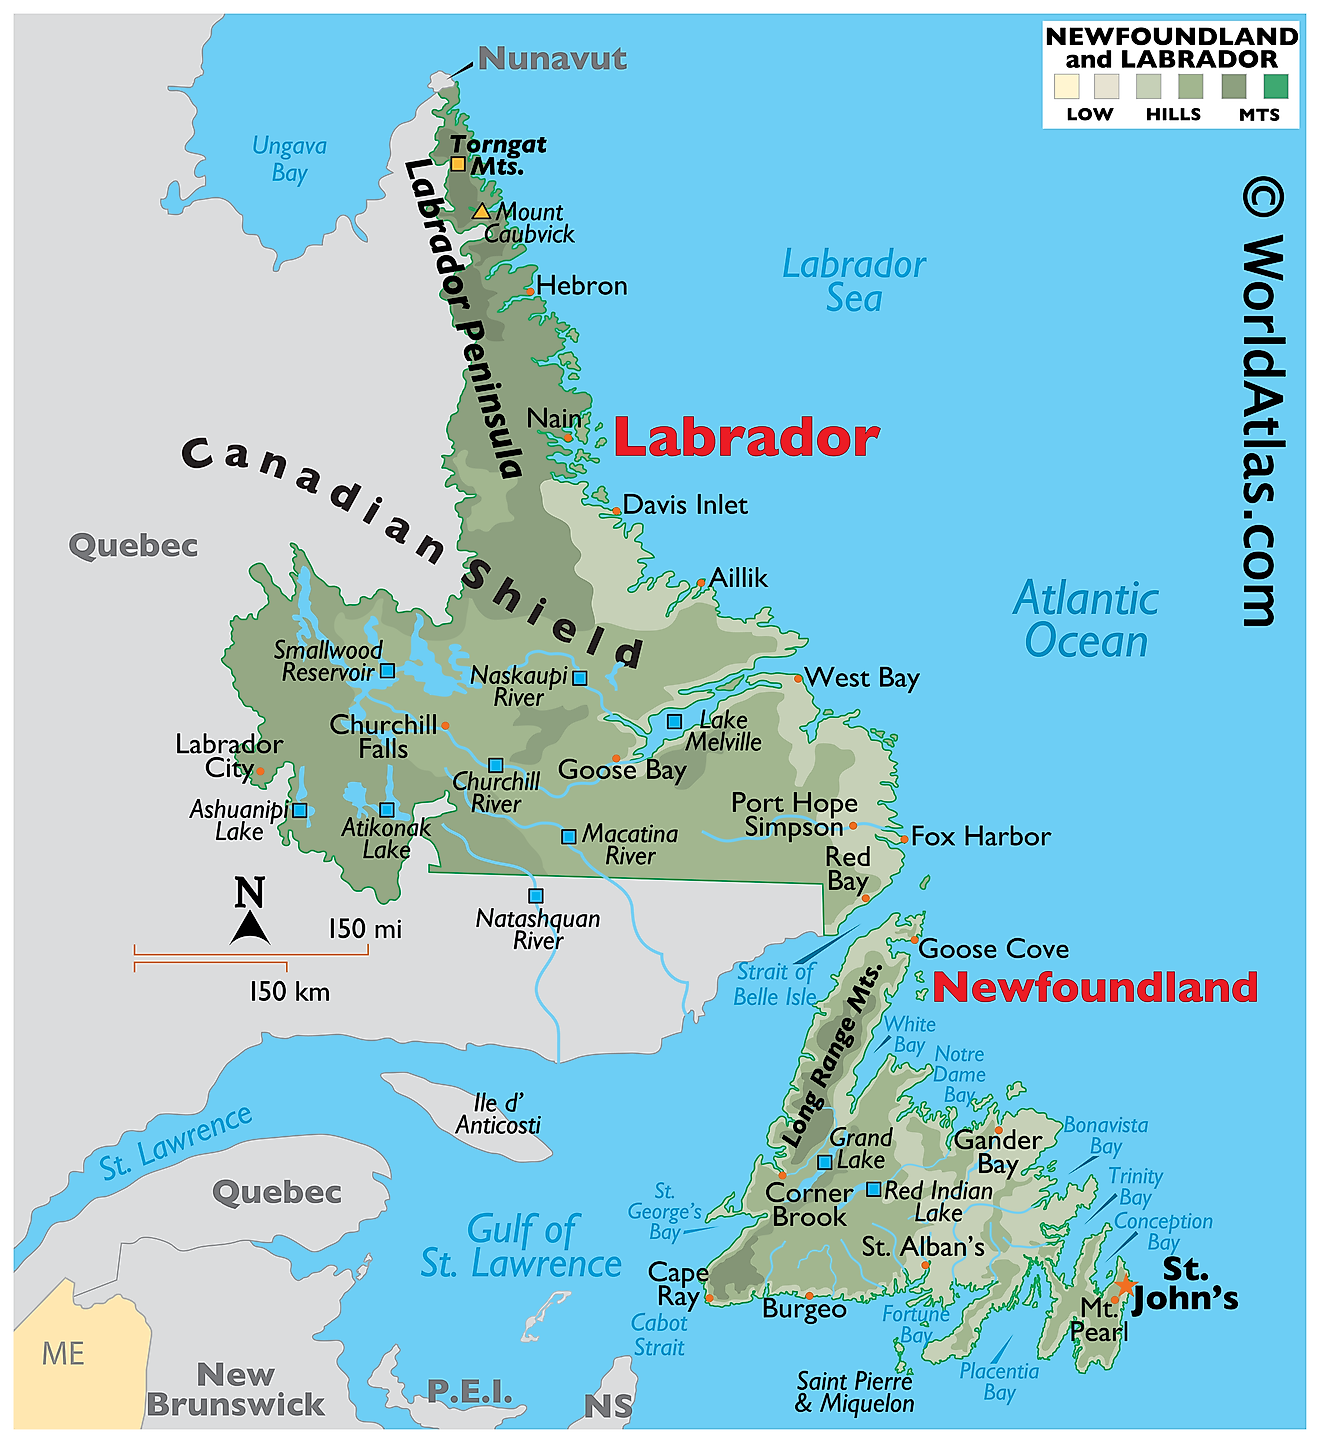 Physical Map of Newfoundland and Labrador. It shows the physical features of Newfoundland and Labrador, including mountain ranges, significant rivers, and major lakes. 